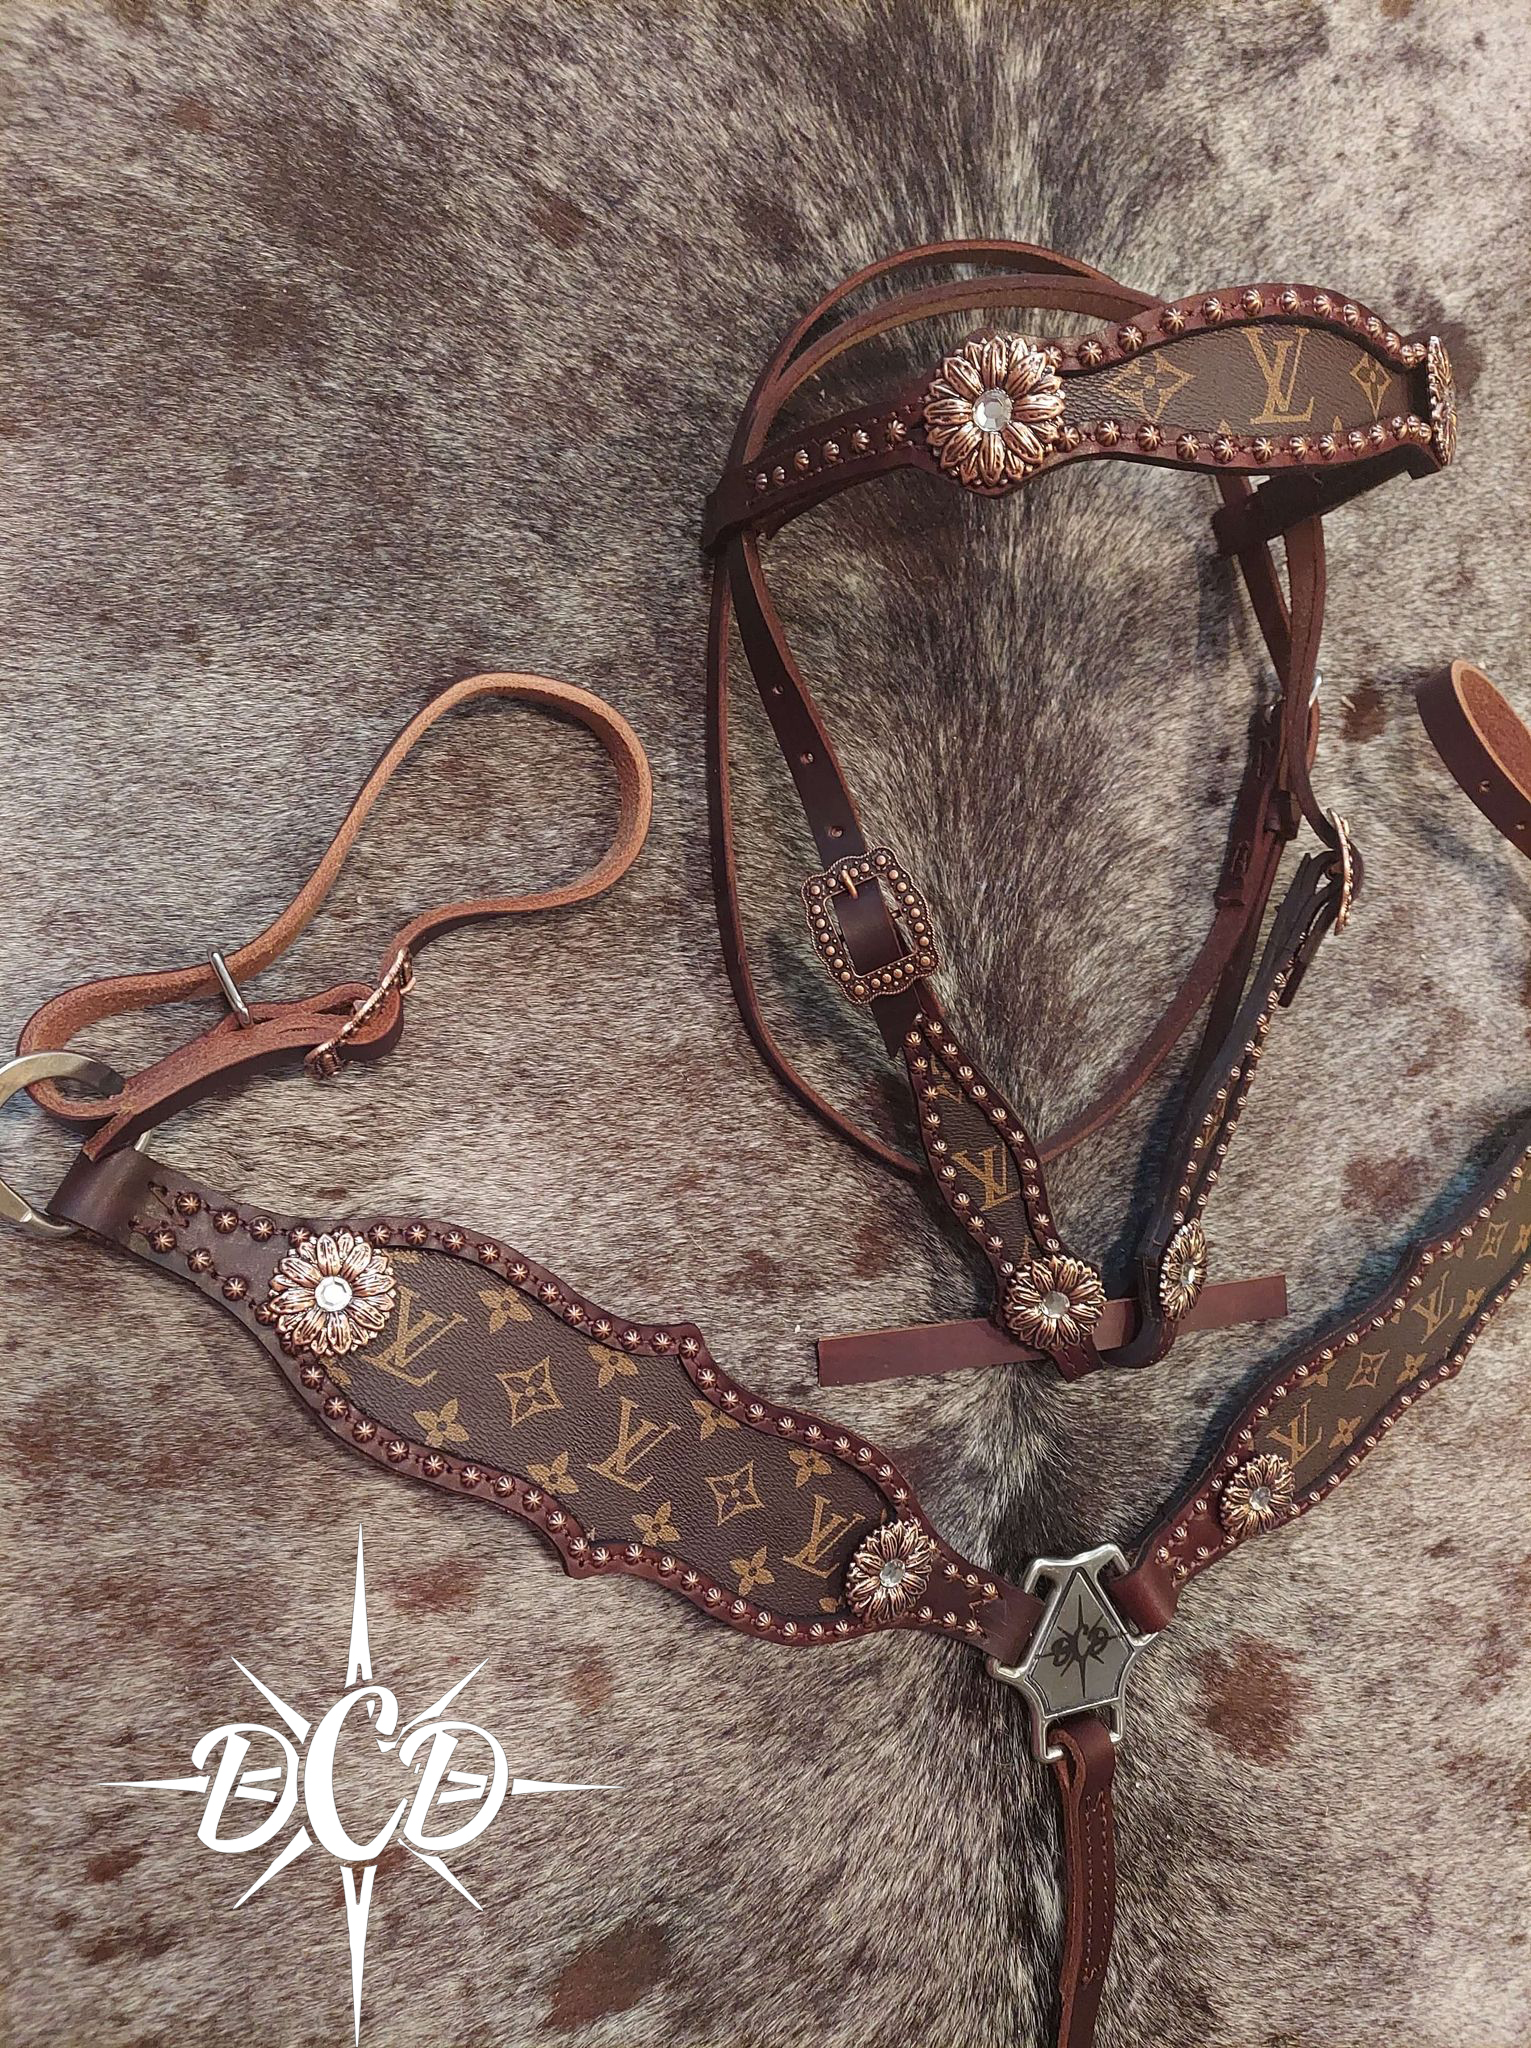 Western Dark Oil Leather Printed Inlay Tack Set of headstall and